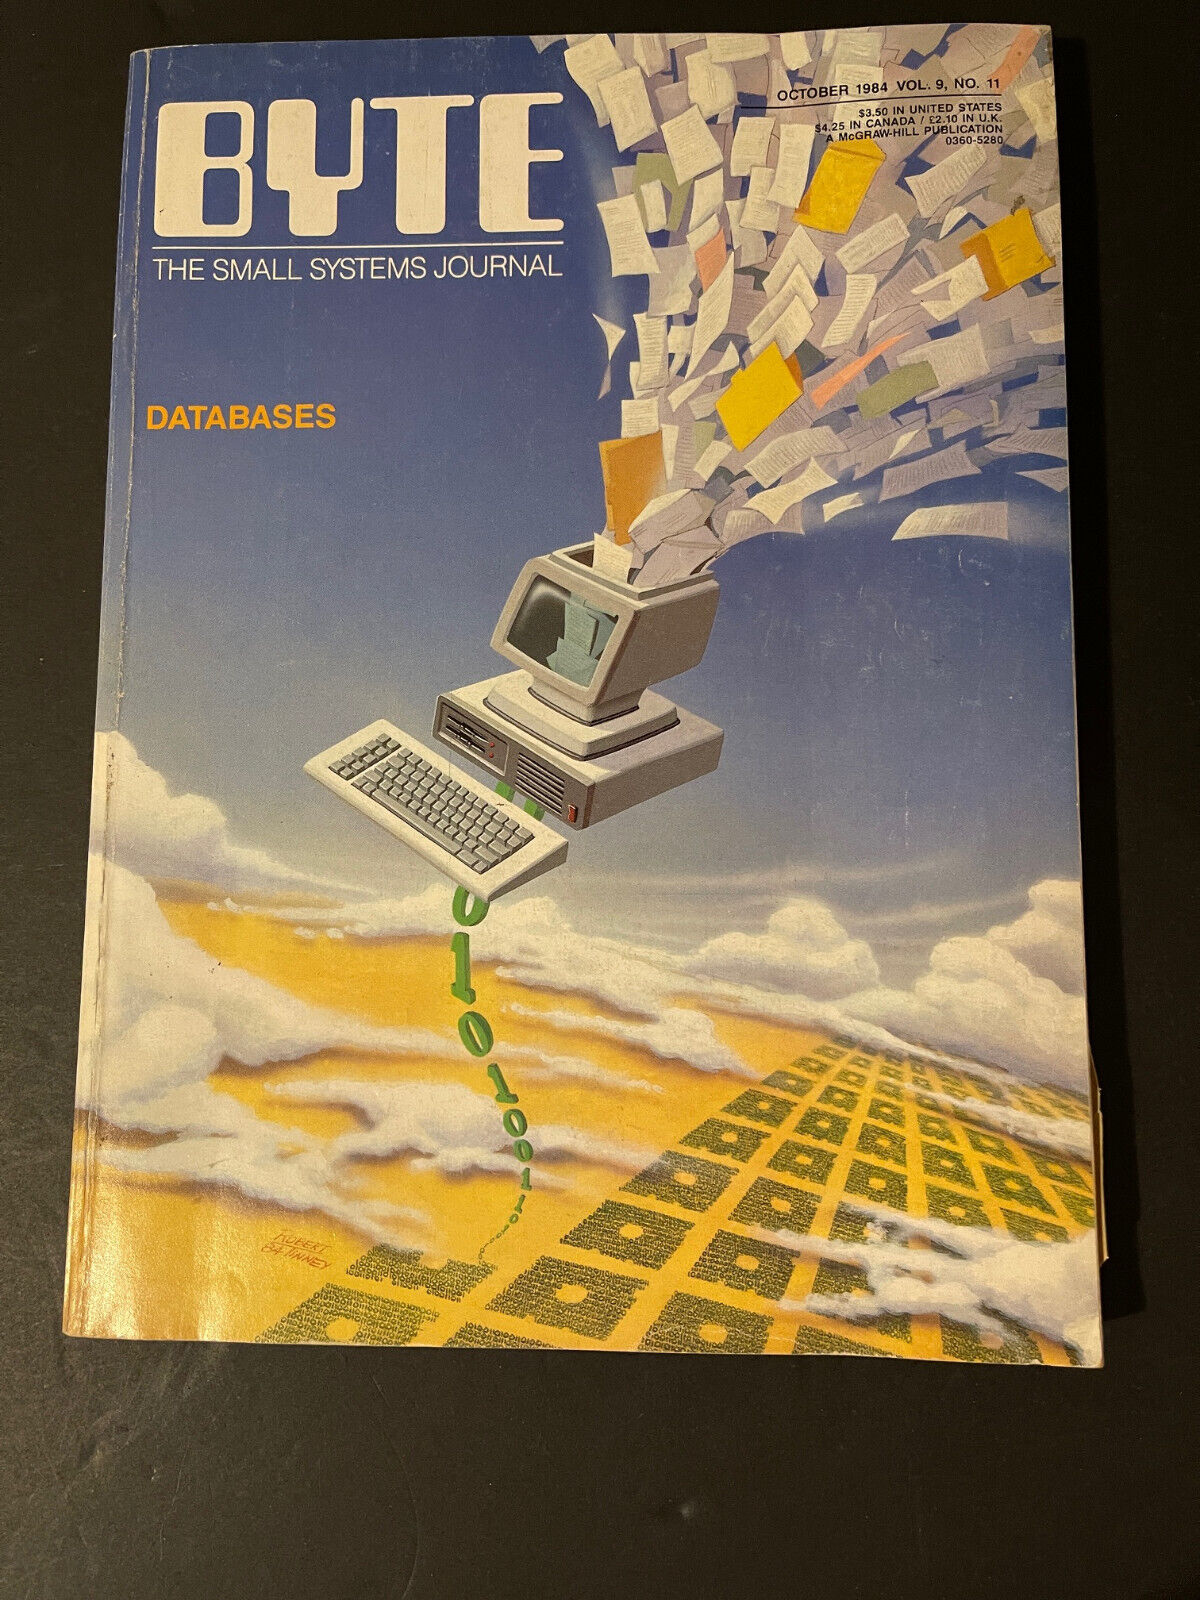 BYTE MAGAZINE OCT 1984 VOL. 9 NO. 11 RARE DATABASES VERY GOOD CONDITION QTY-1